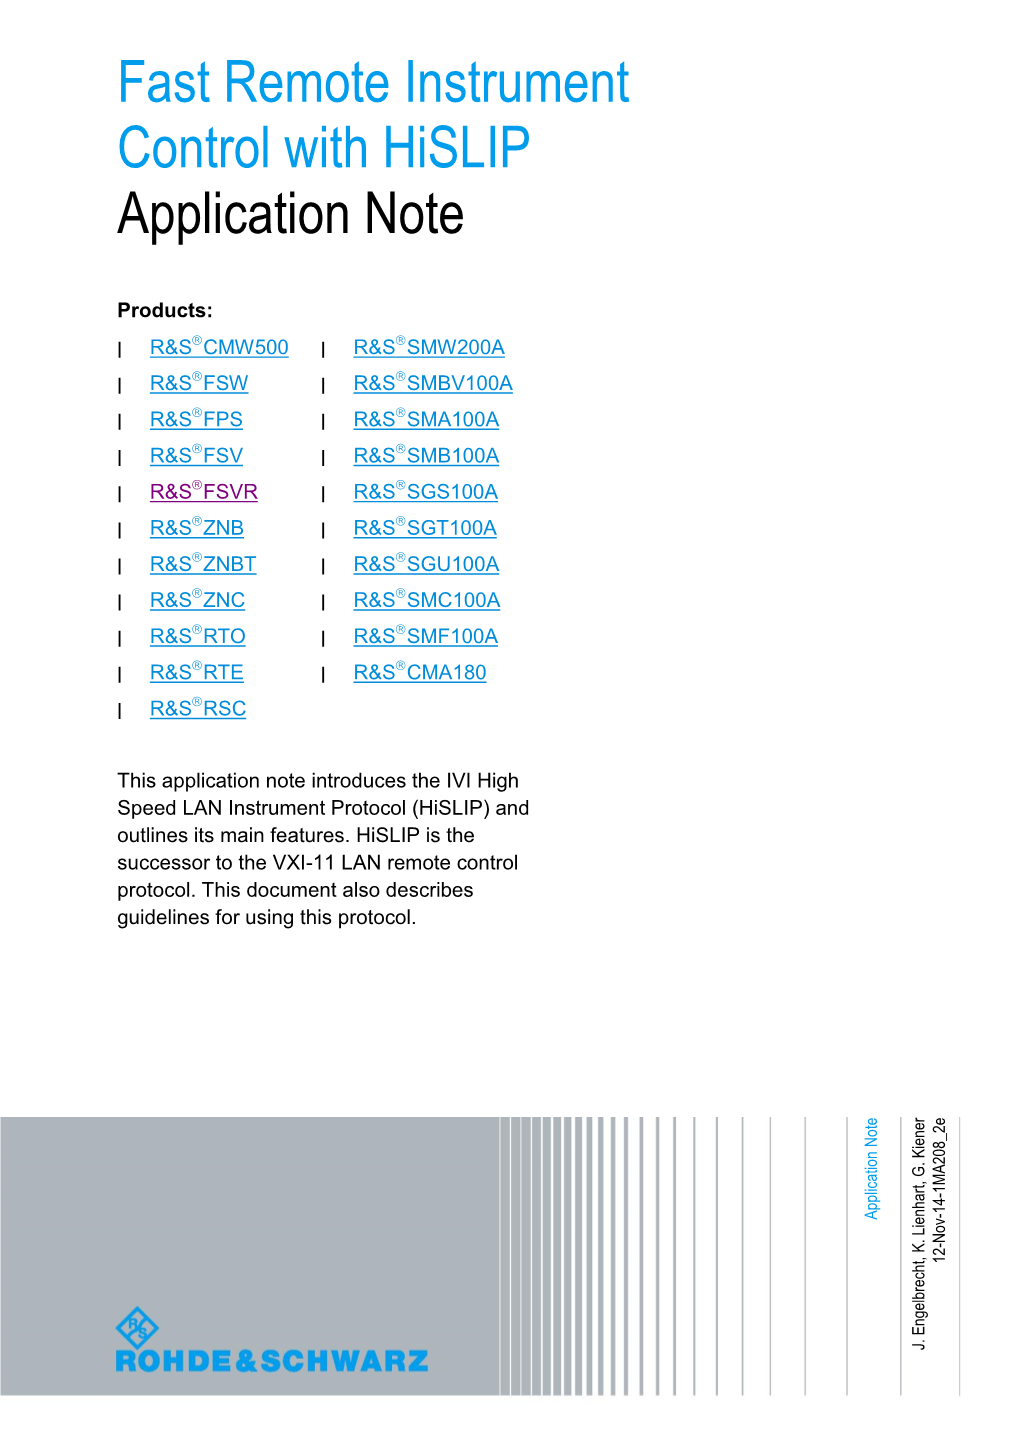 Fast Remote Instrument Control with Hislip Application Note